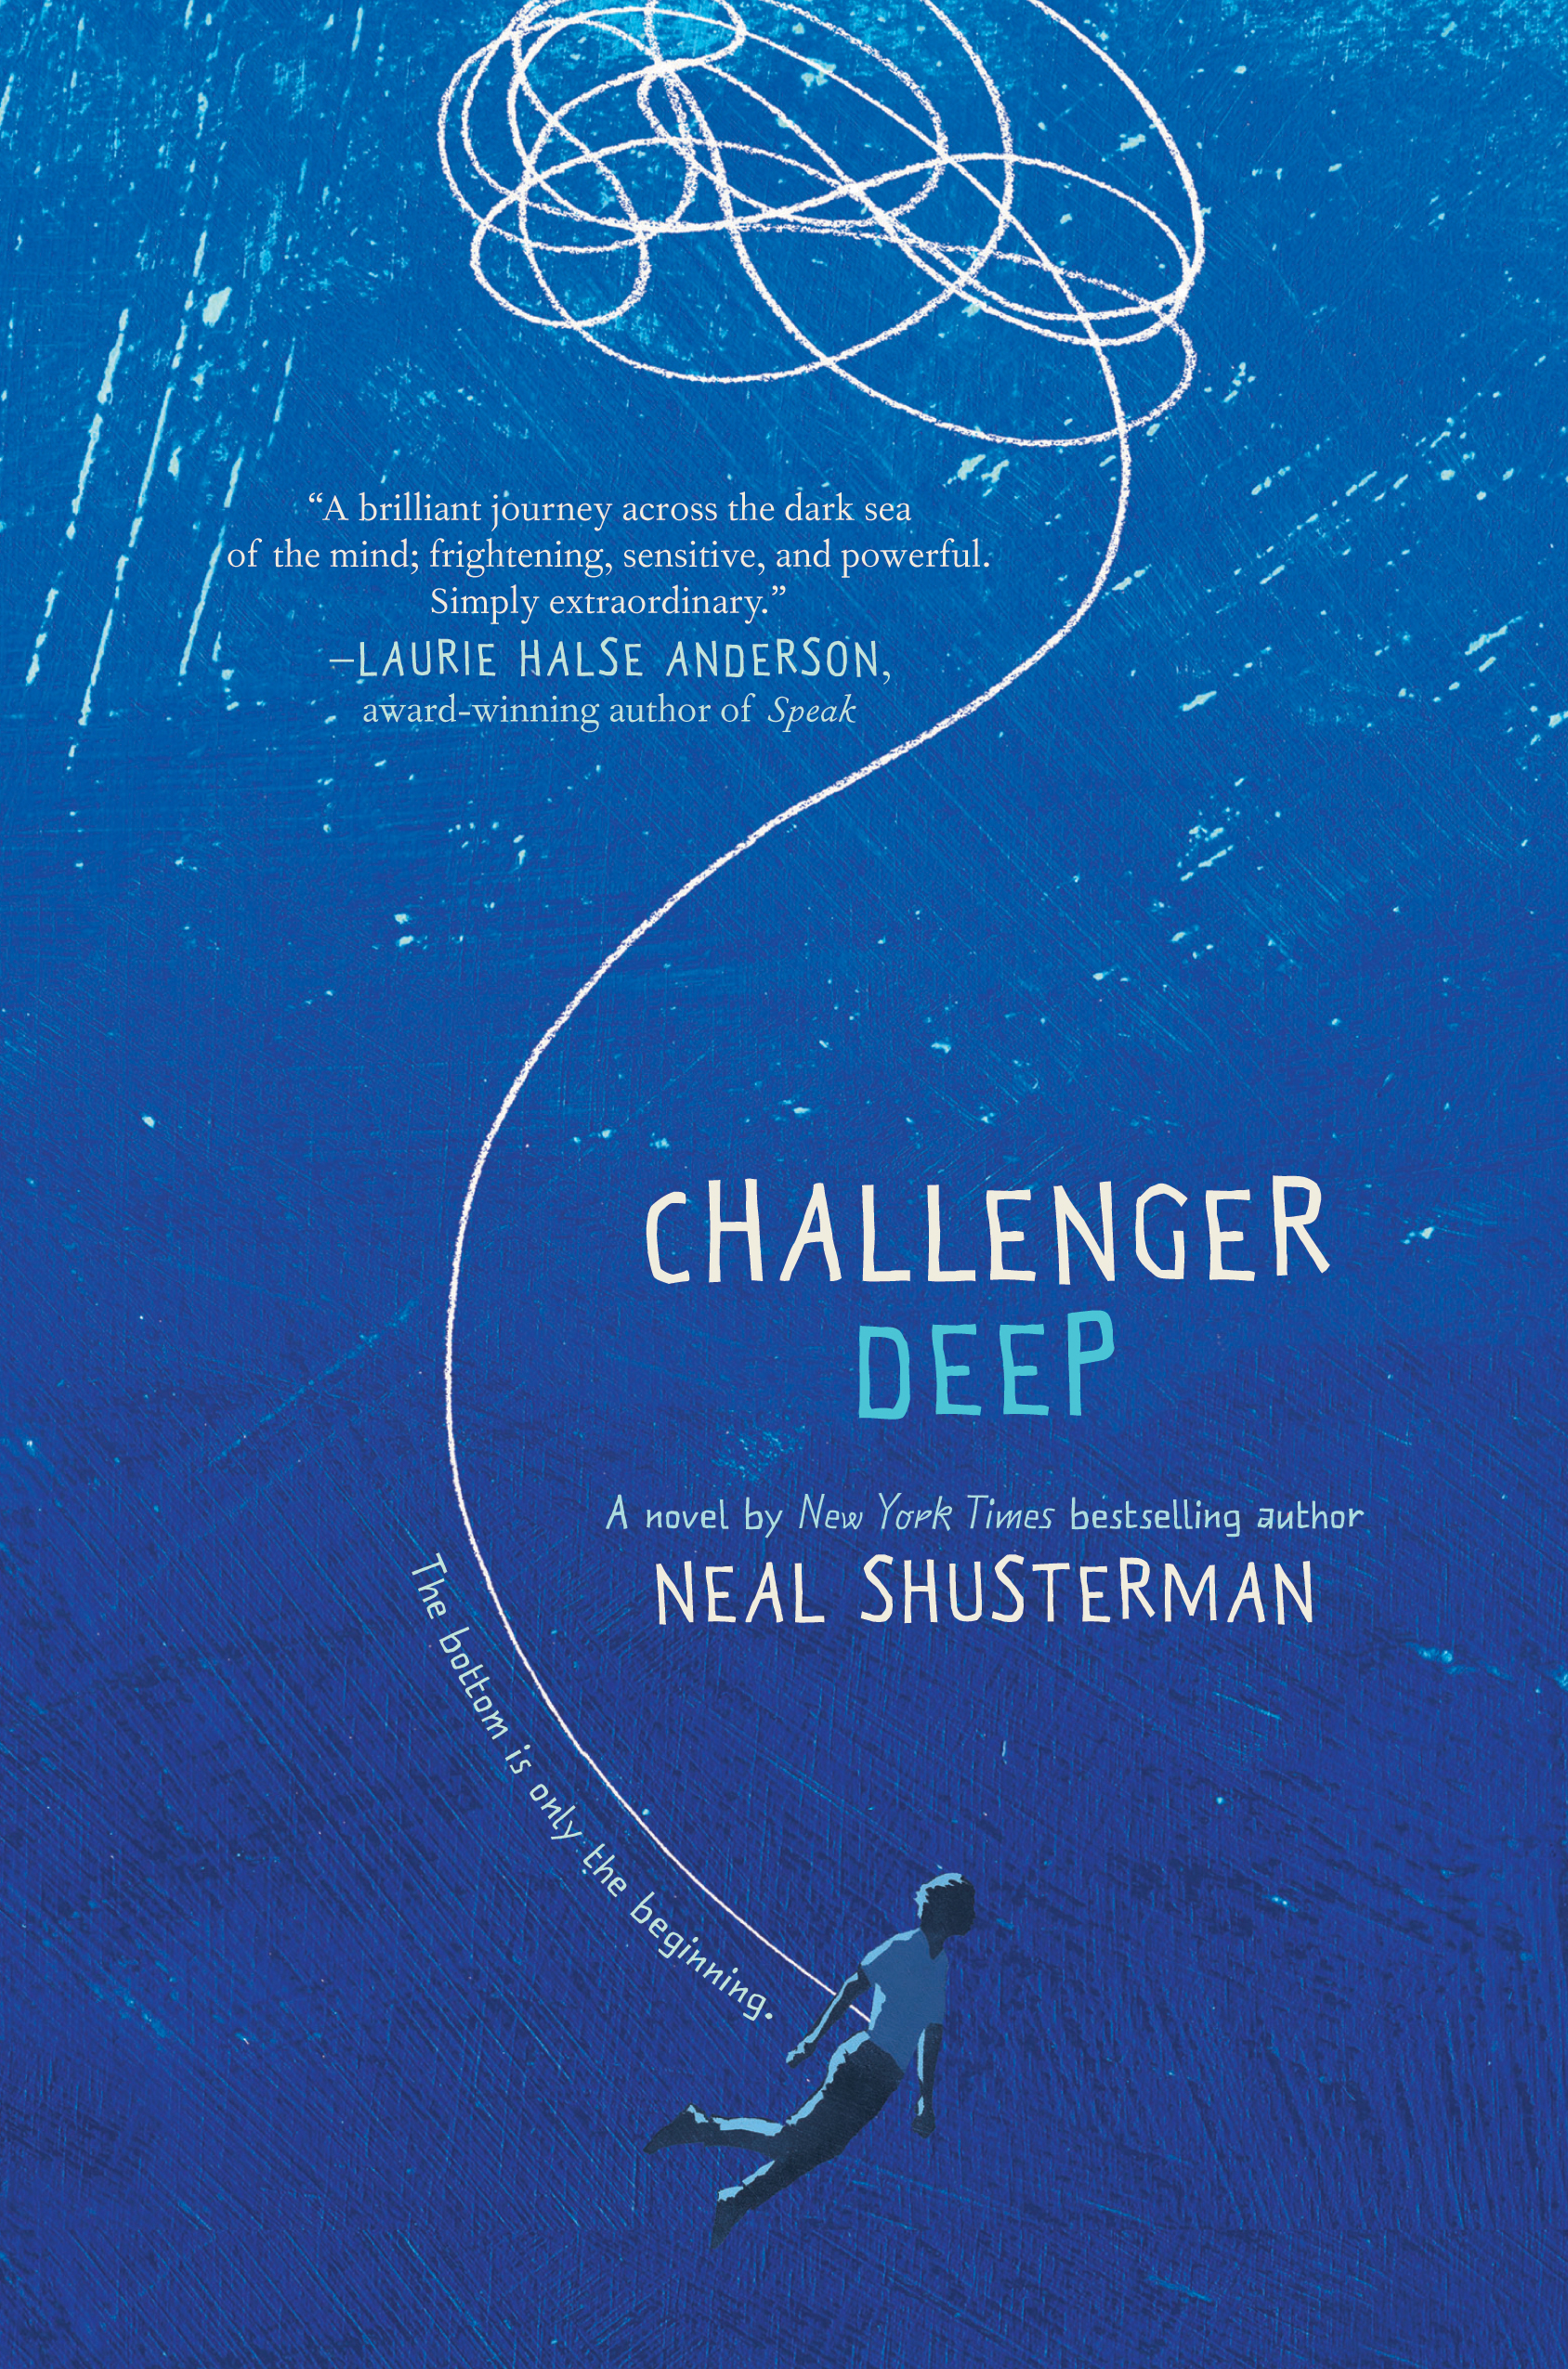 Challenger Deep cover. A bright blue cover with a person floating downward, with scribbles tracing their descent.